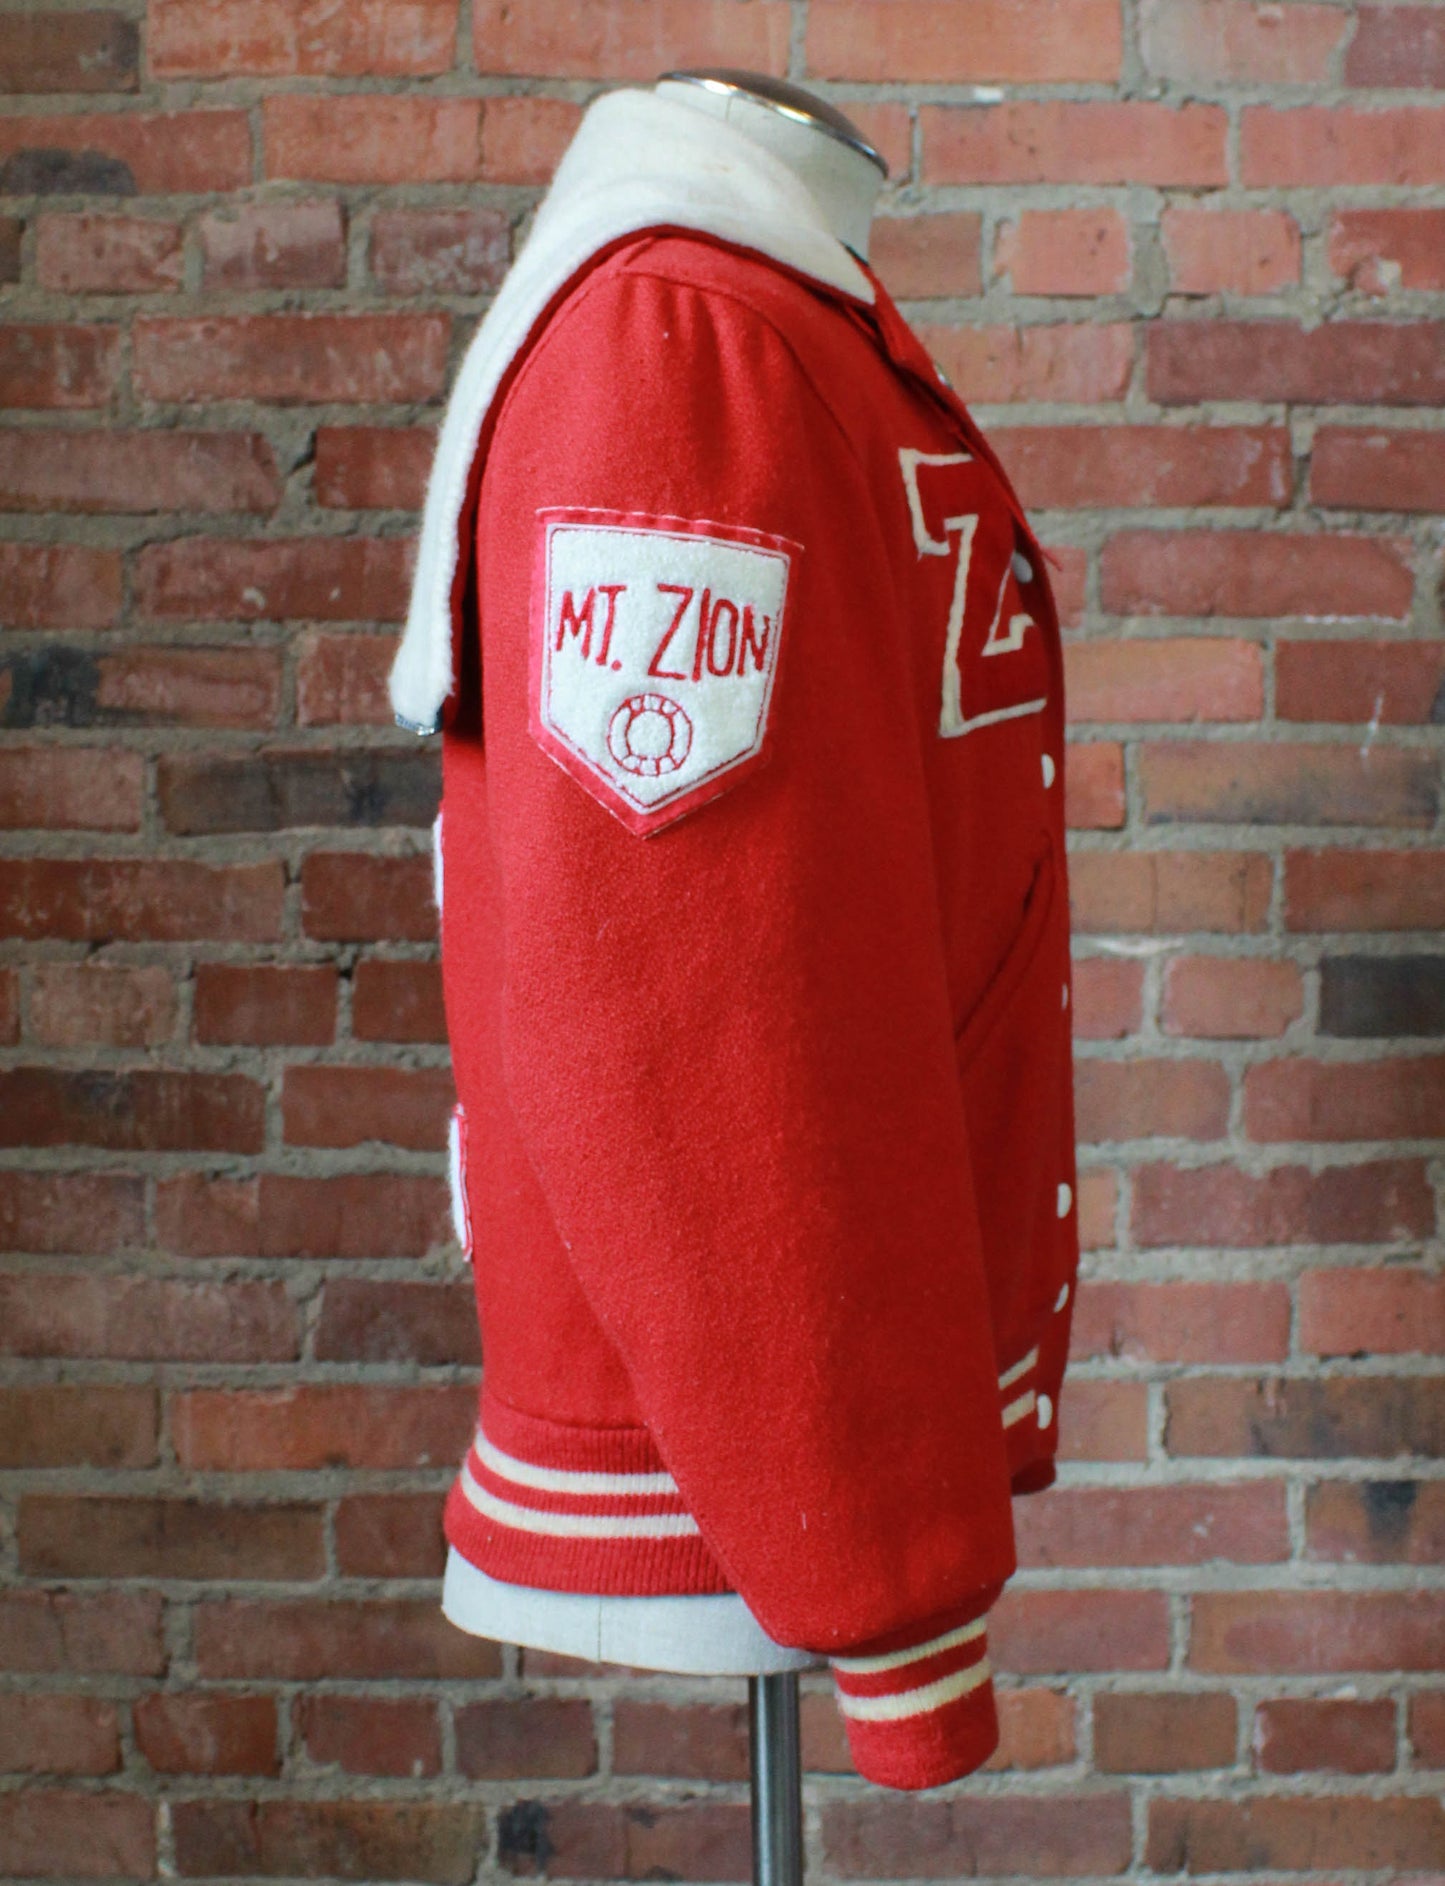 Women's Vintage 1982 Mt. Zion Varsity Letterman Jacket Lisa Volleyball Bomber Red White Large